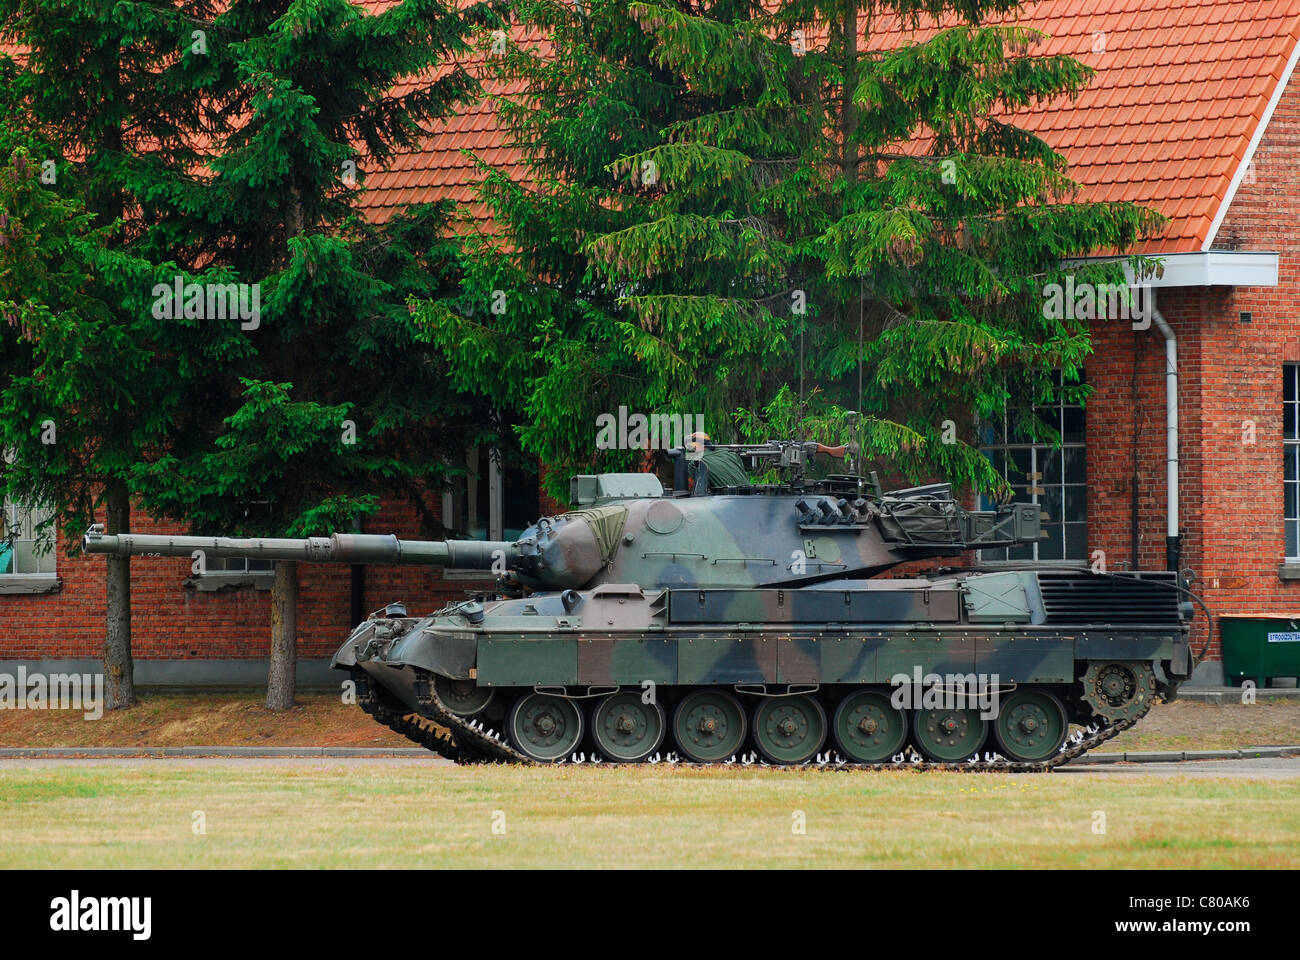 Leopoldsburg, Belgium - The Leopard 1A5 main battle tank in use with the Belgian Army. Stock Photo